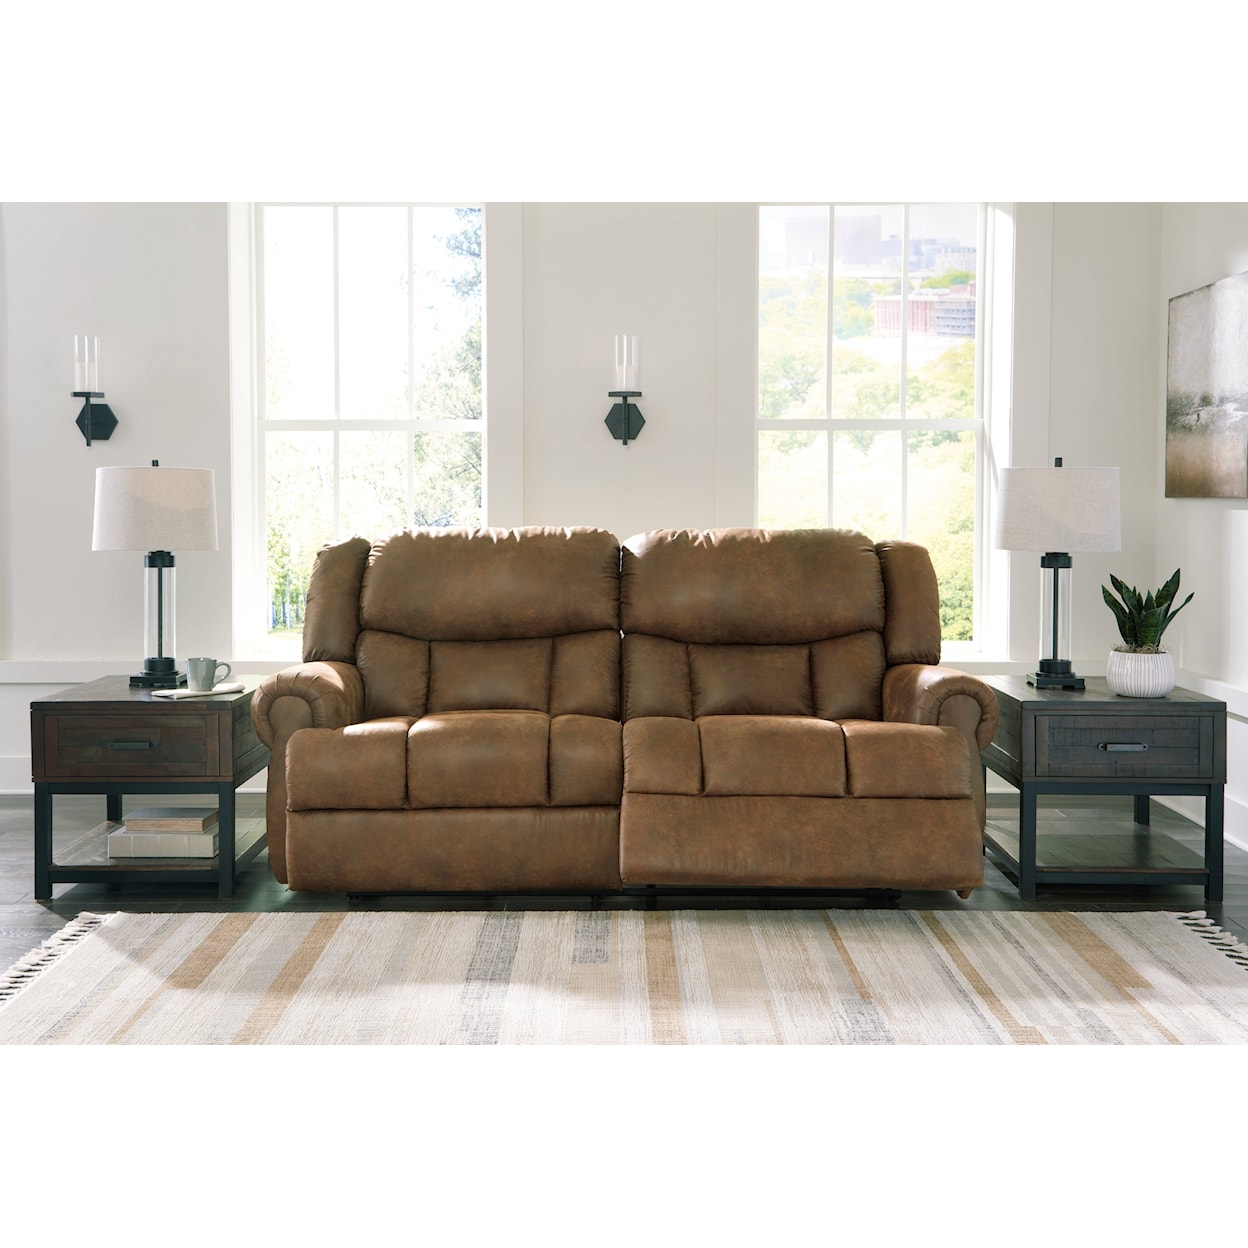 Signature Design by Ashley Furniture Boothbay 2 Seat Reclining Sofa